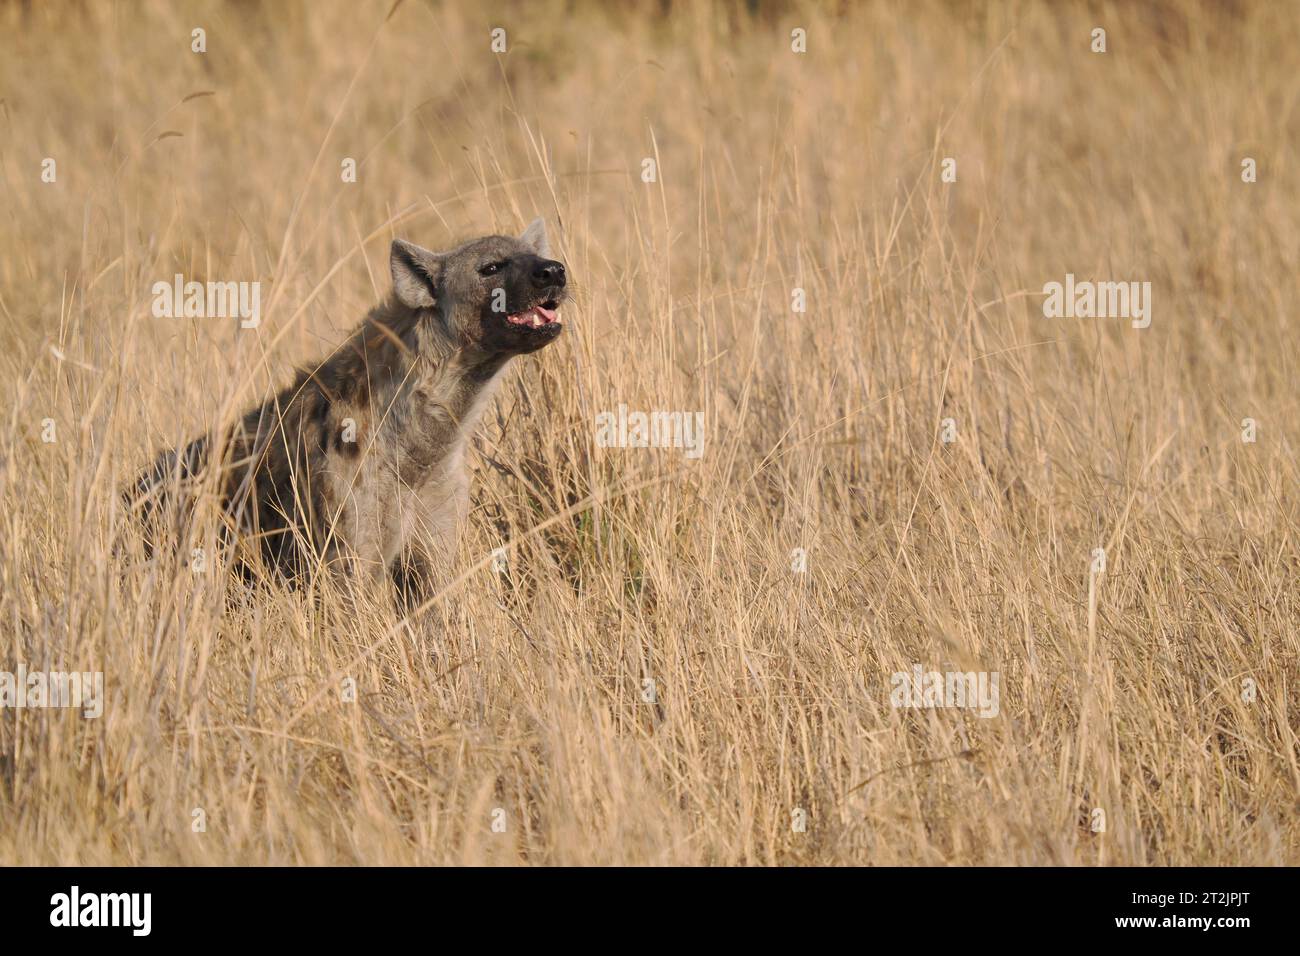 This spotted hyena had found some carrion it was eating, but was frequently observing its environment for danger. Stock Photo